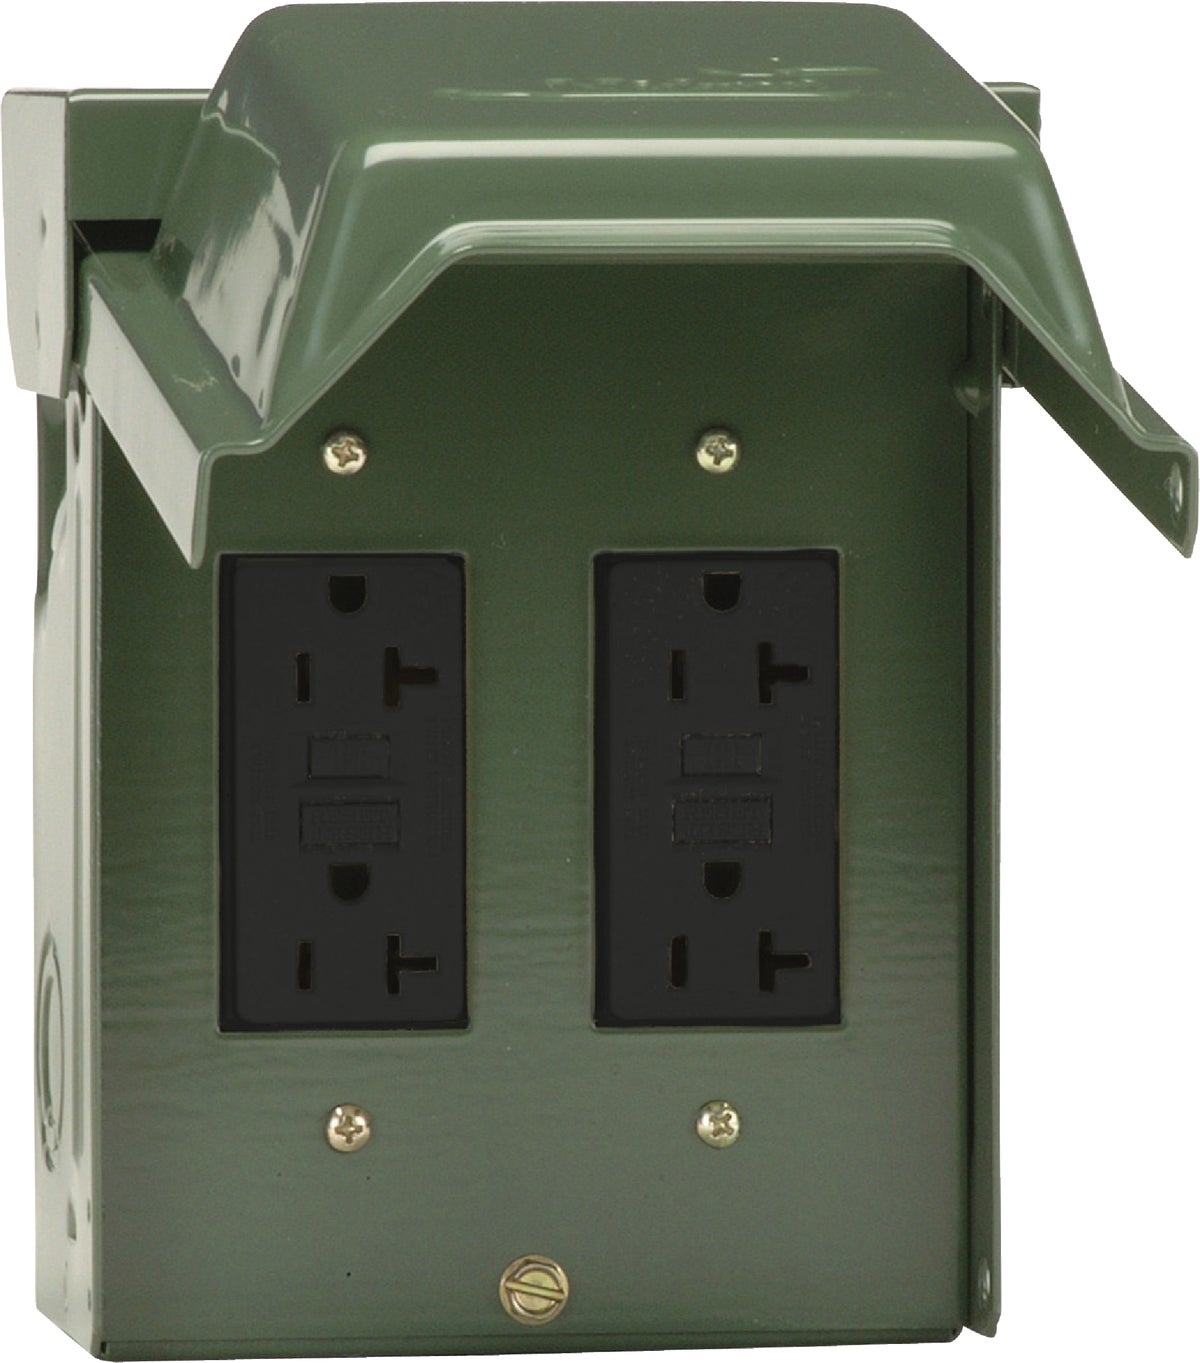 Buy Ge Backyard Gfi Outlet With Switch Green